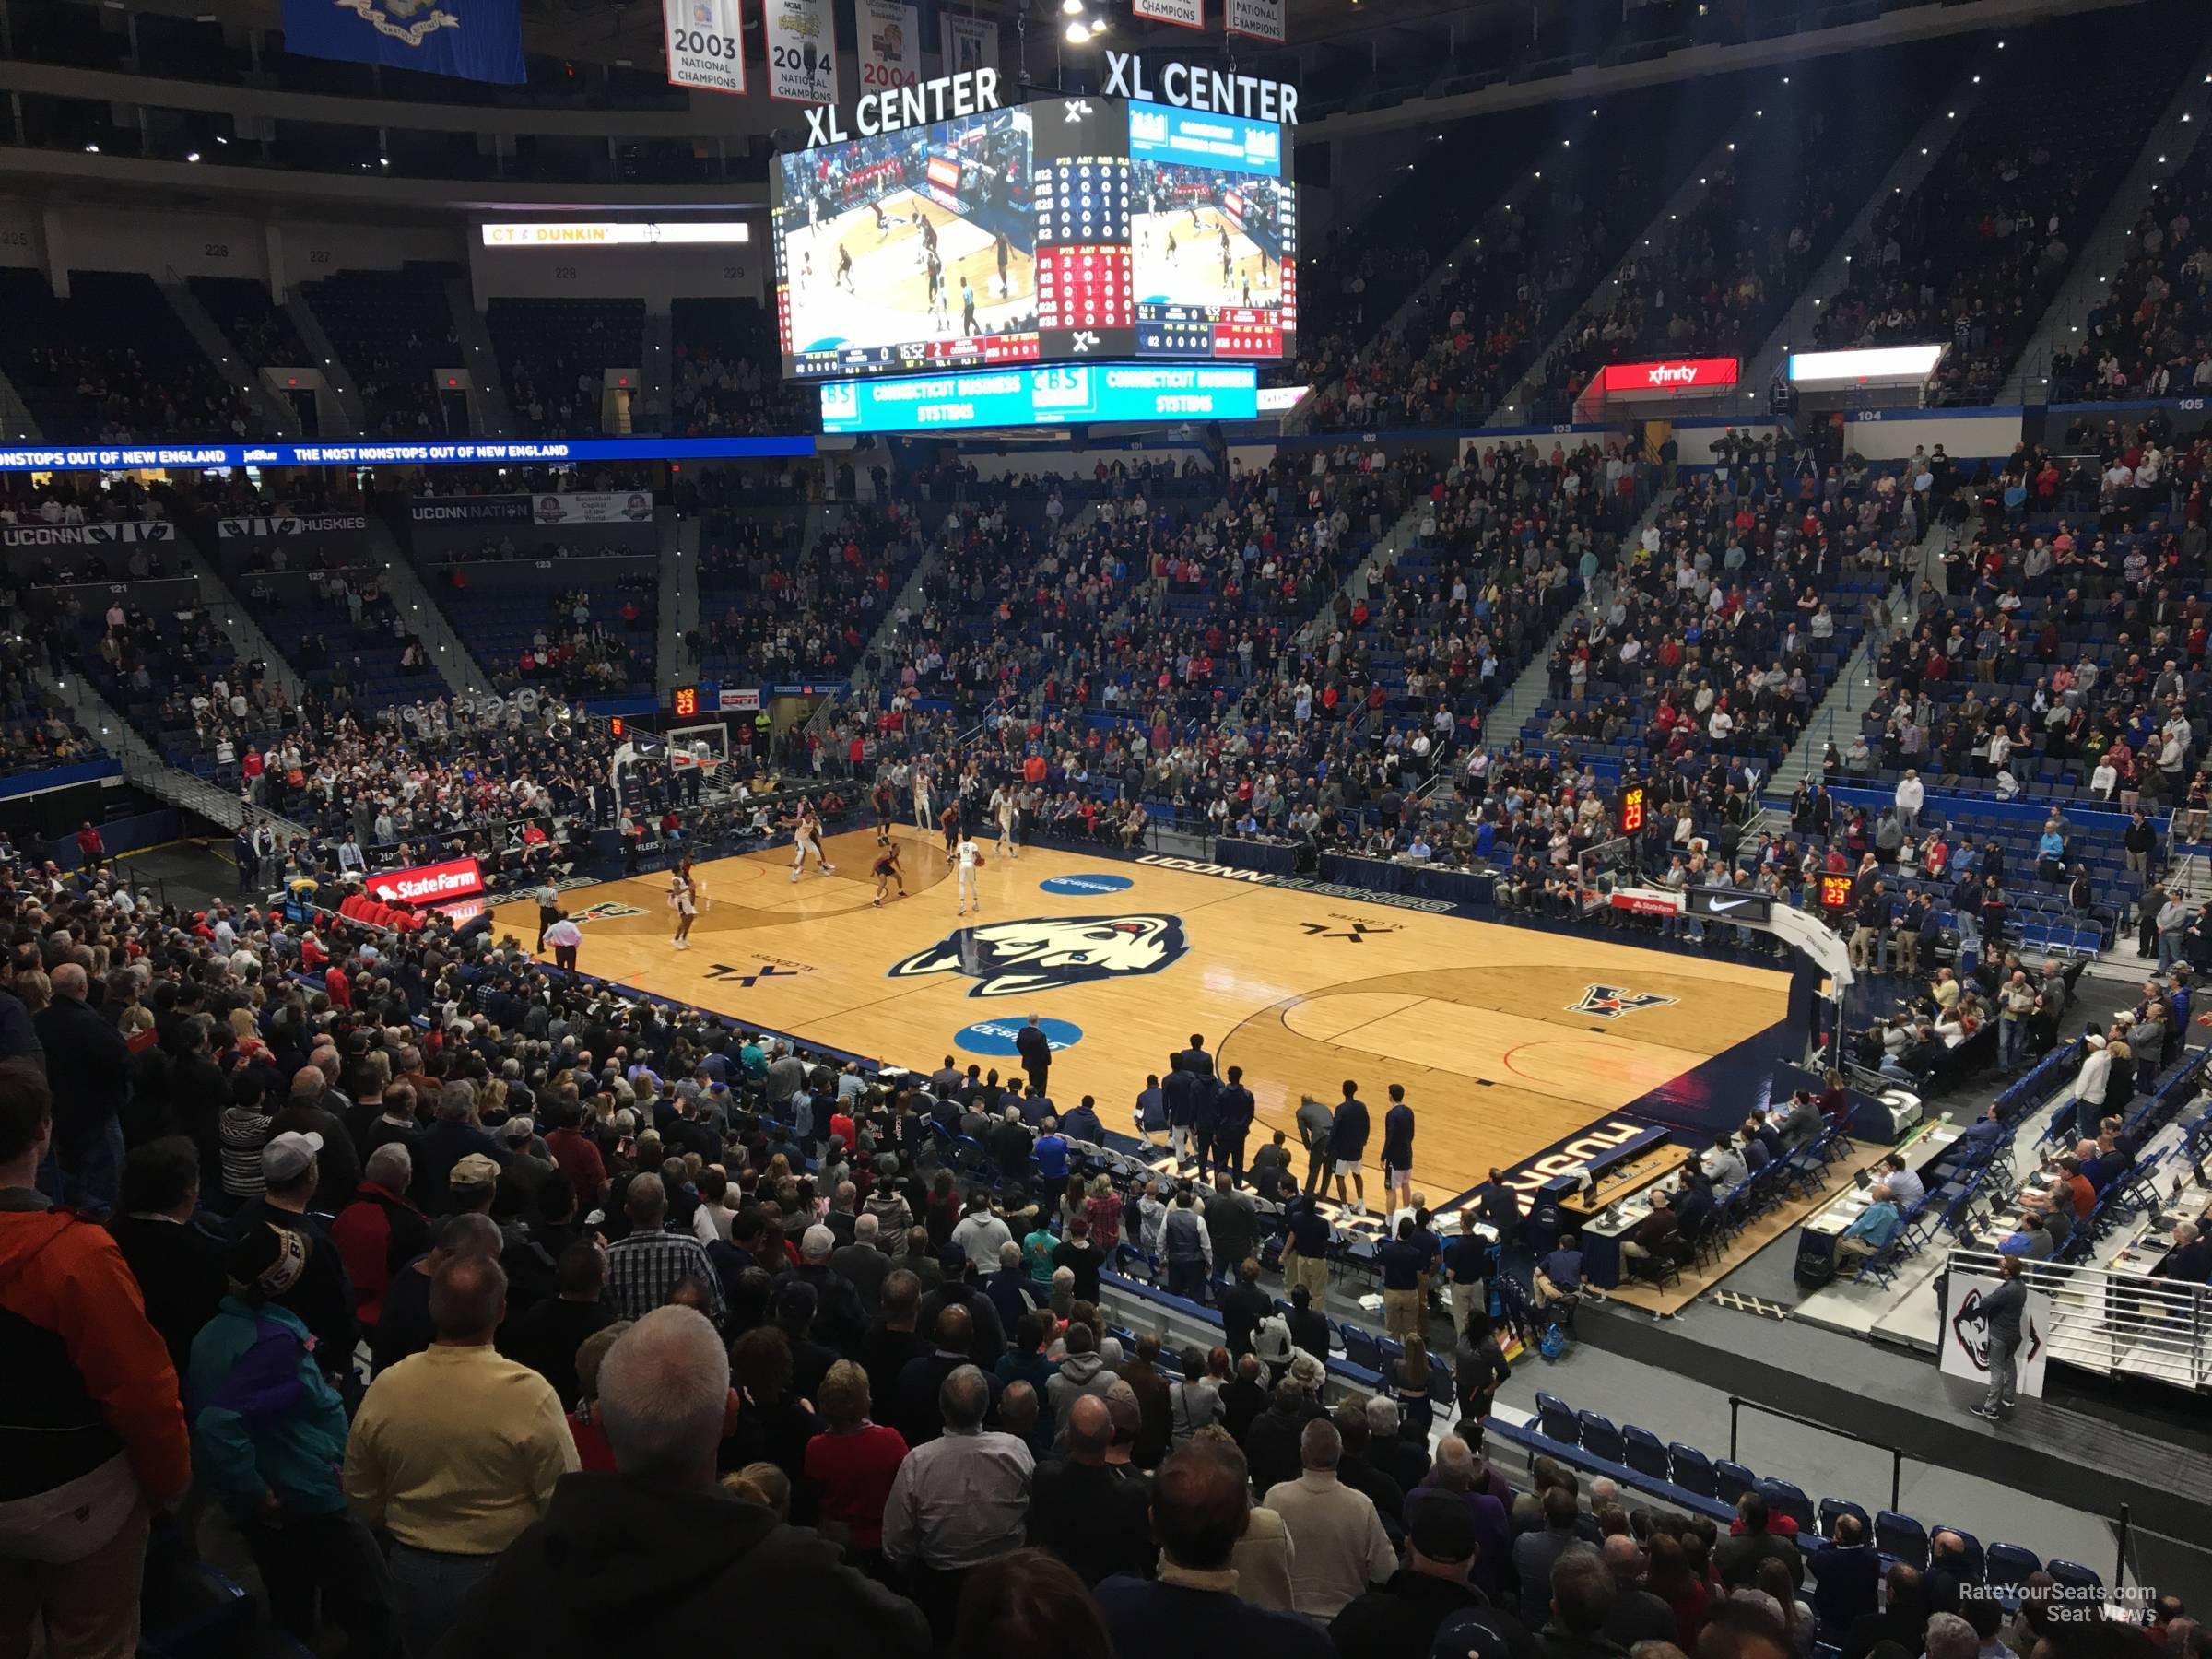 section 113, row r seat view  - xl center